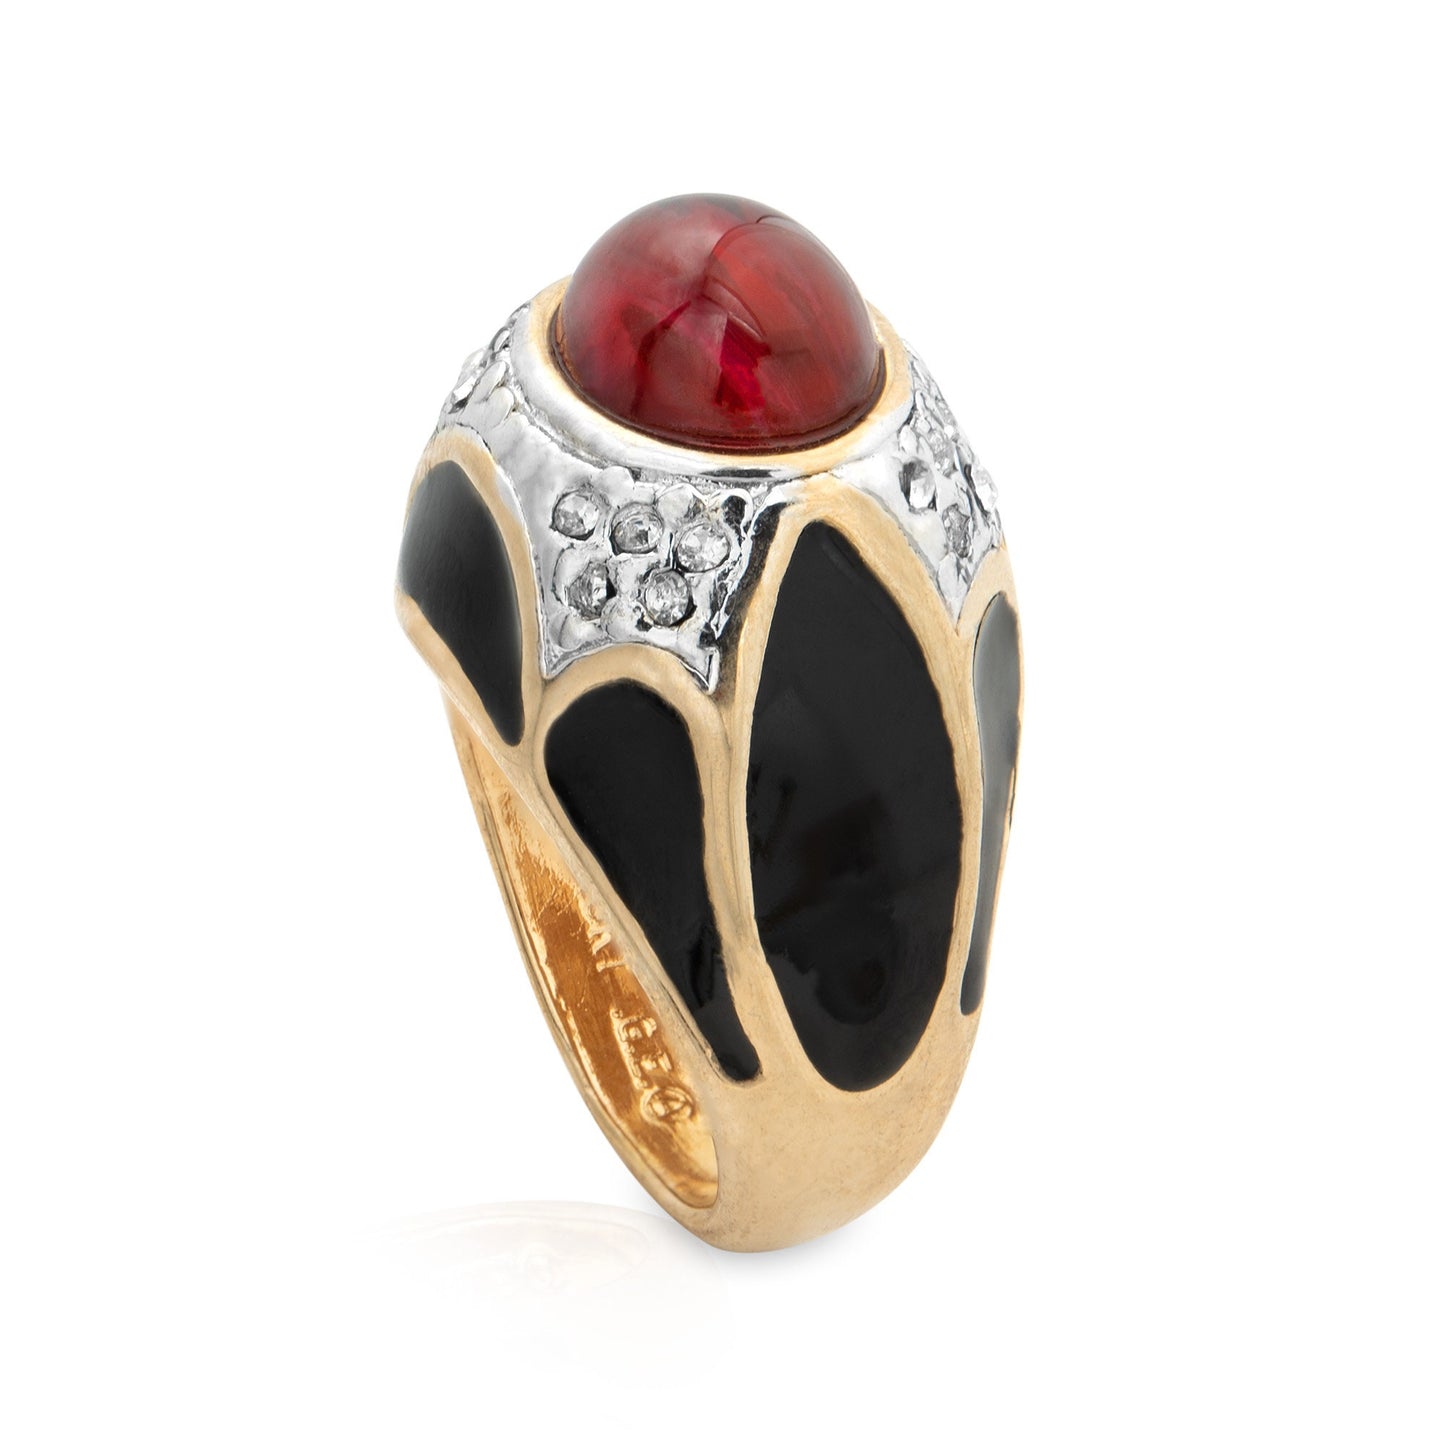 Vintage Ring 1980s Black Enamel Ring with Ruby Cabochon Stone Surrounded by Clear Crystals R2094 - Limited Stock - Never Worn